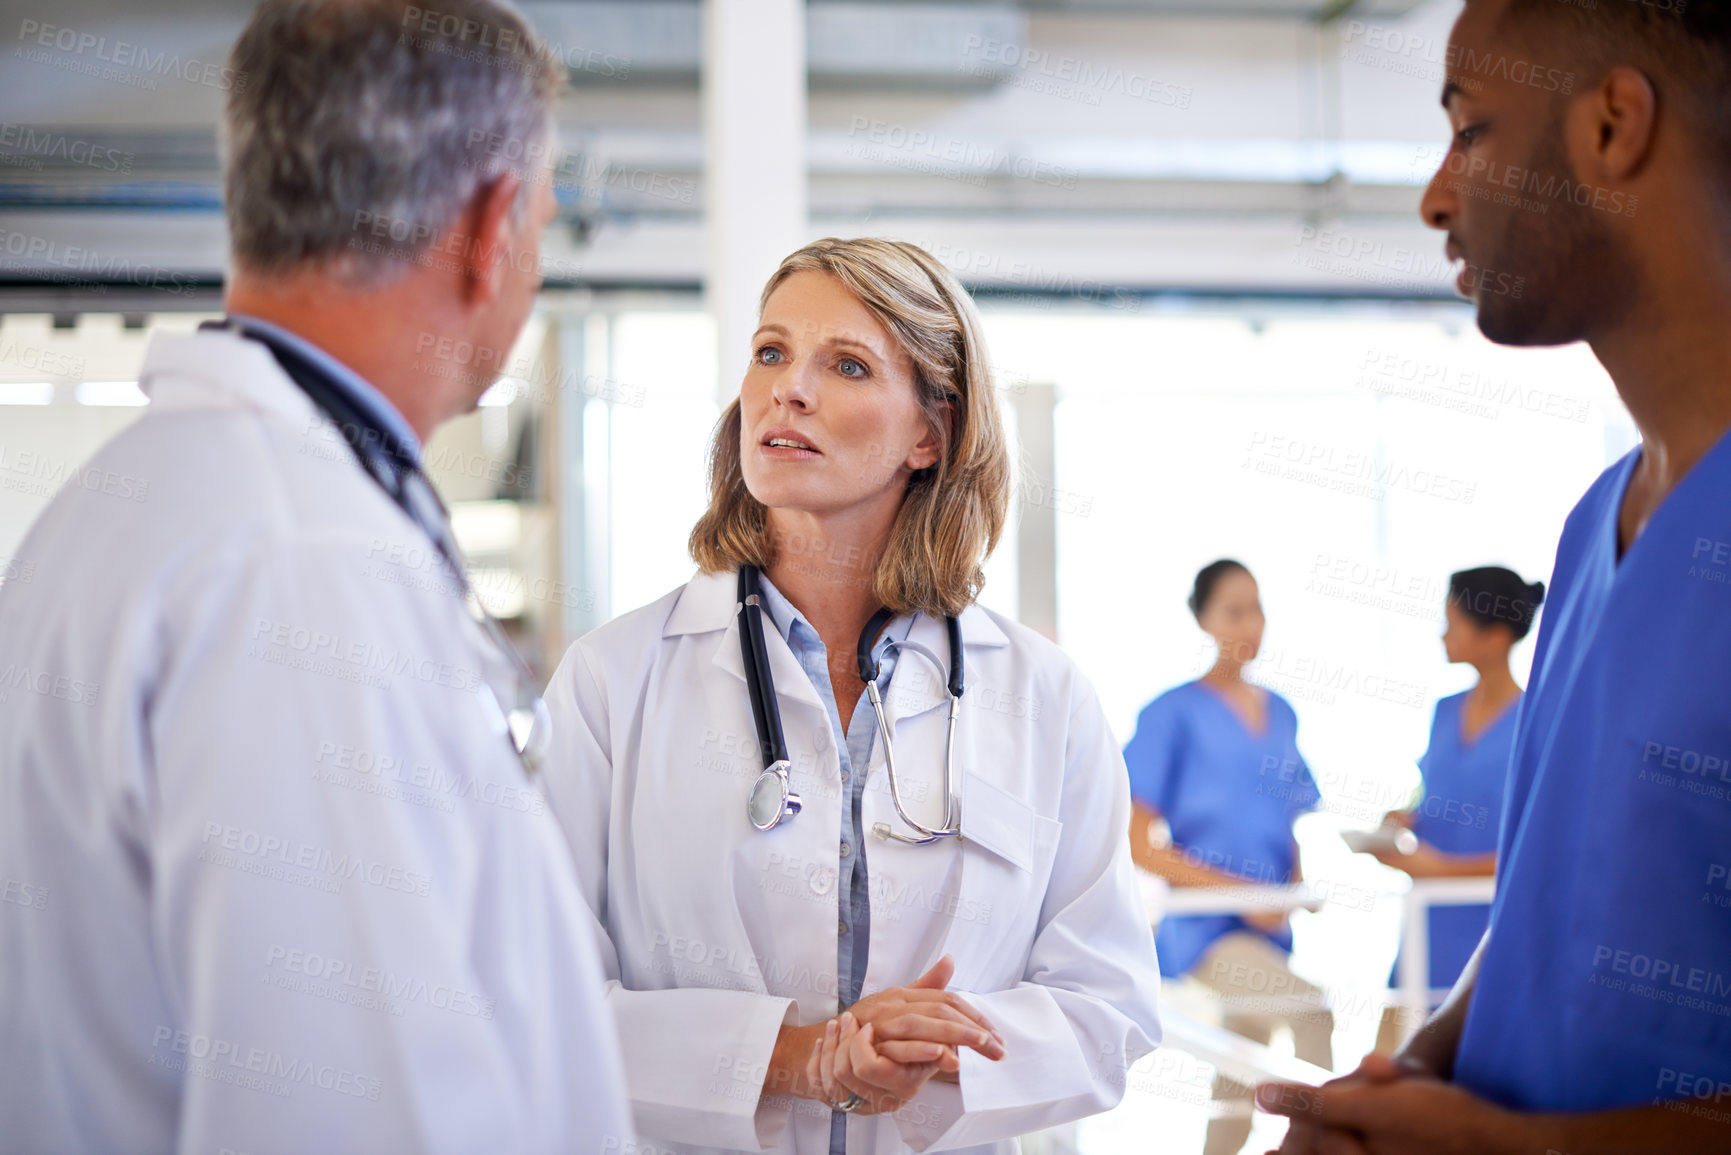 Buy stock photo Shot of a group of medical professionals discussing work at a hospital